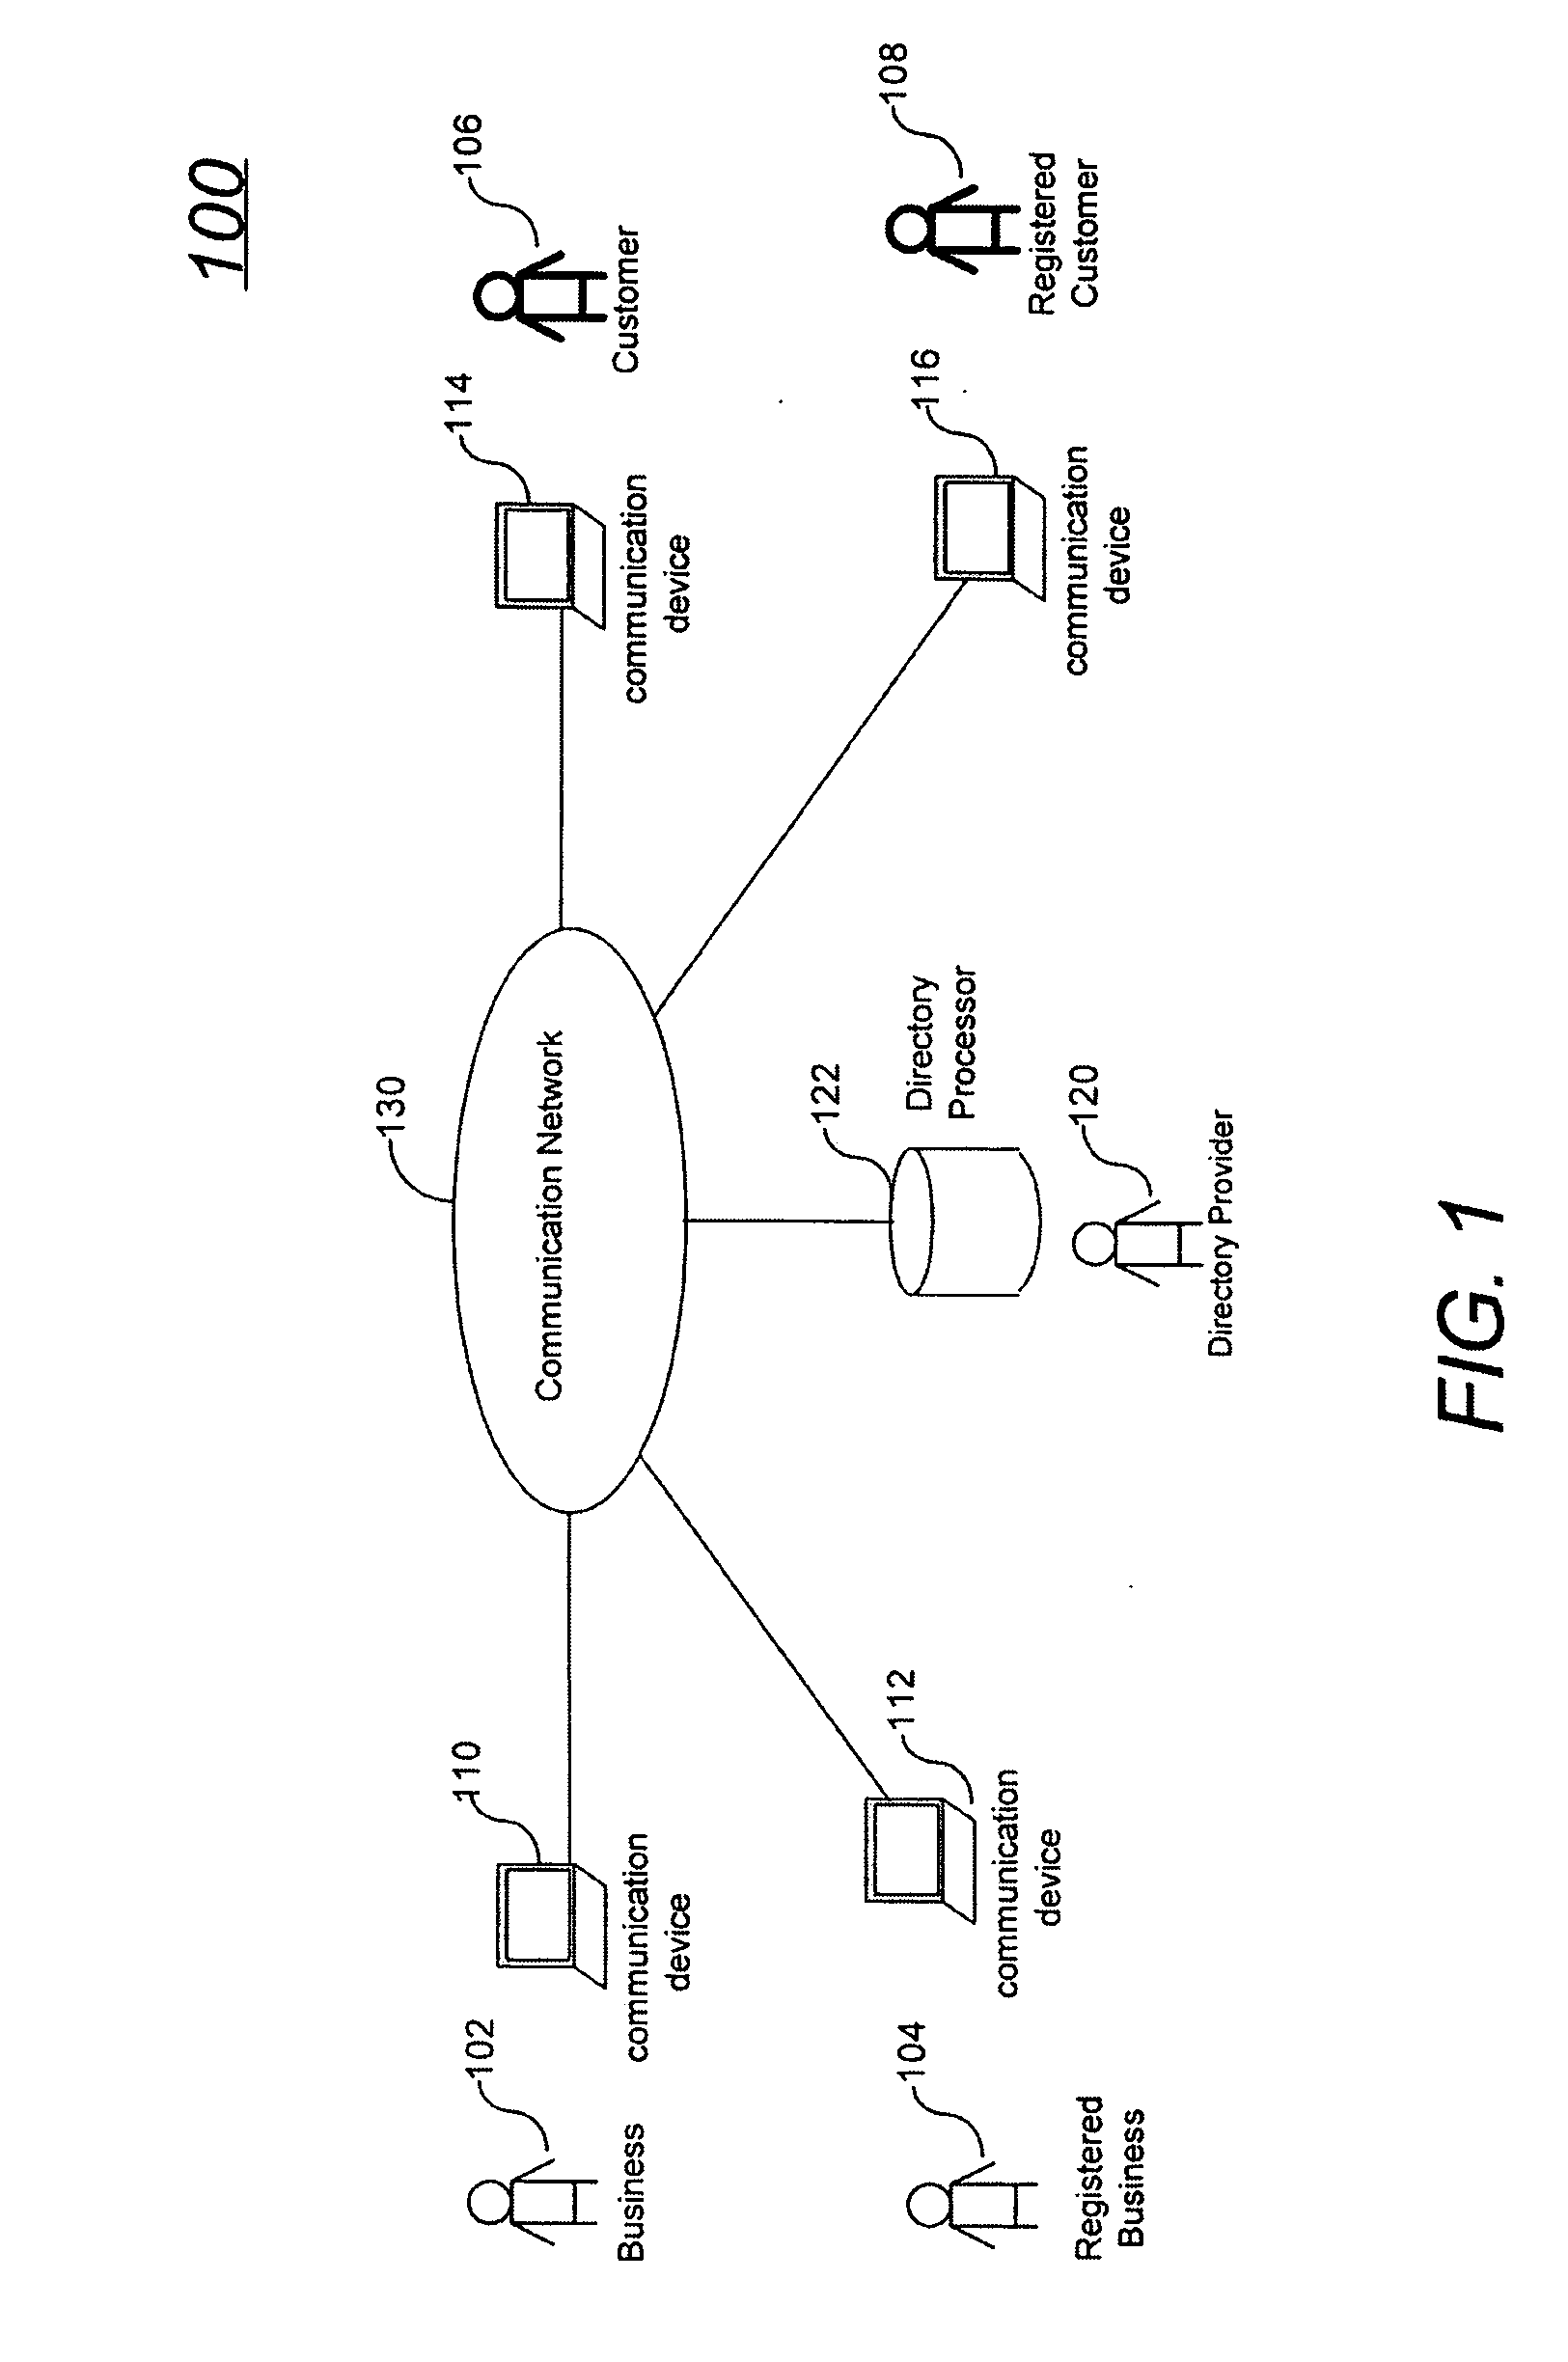 Method and apparatus for providing a rewards-based feedback incentive mechanism